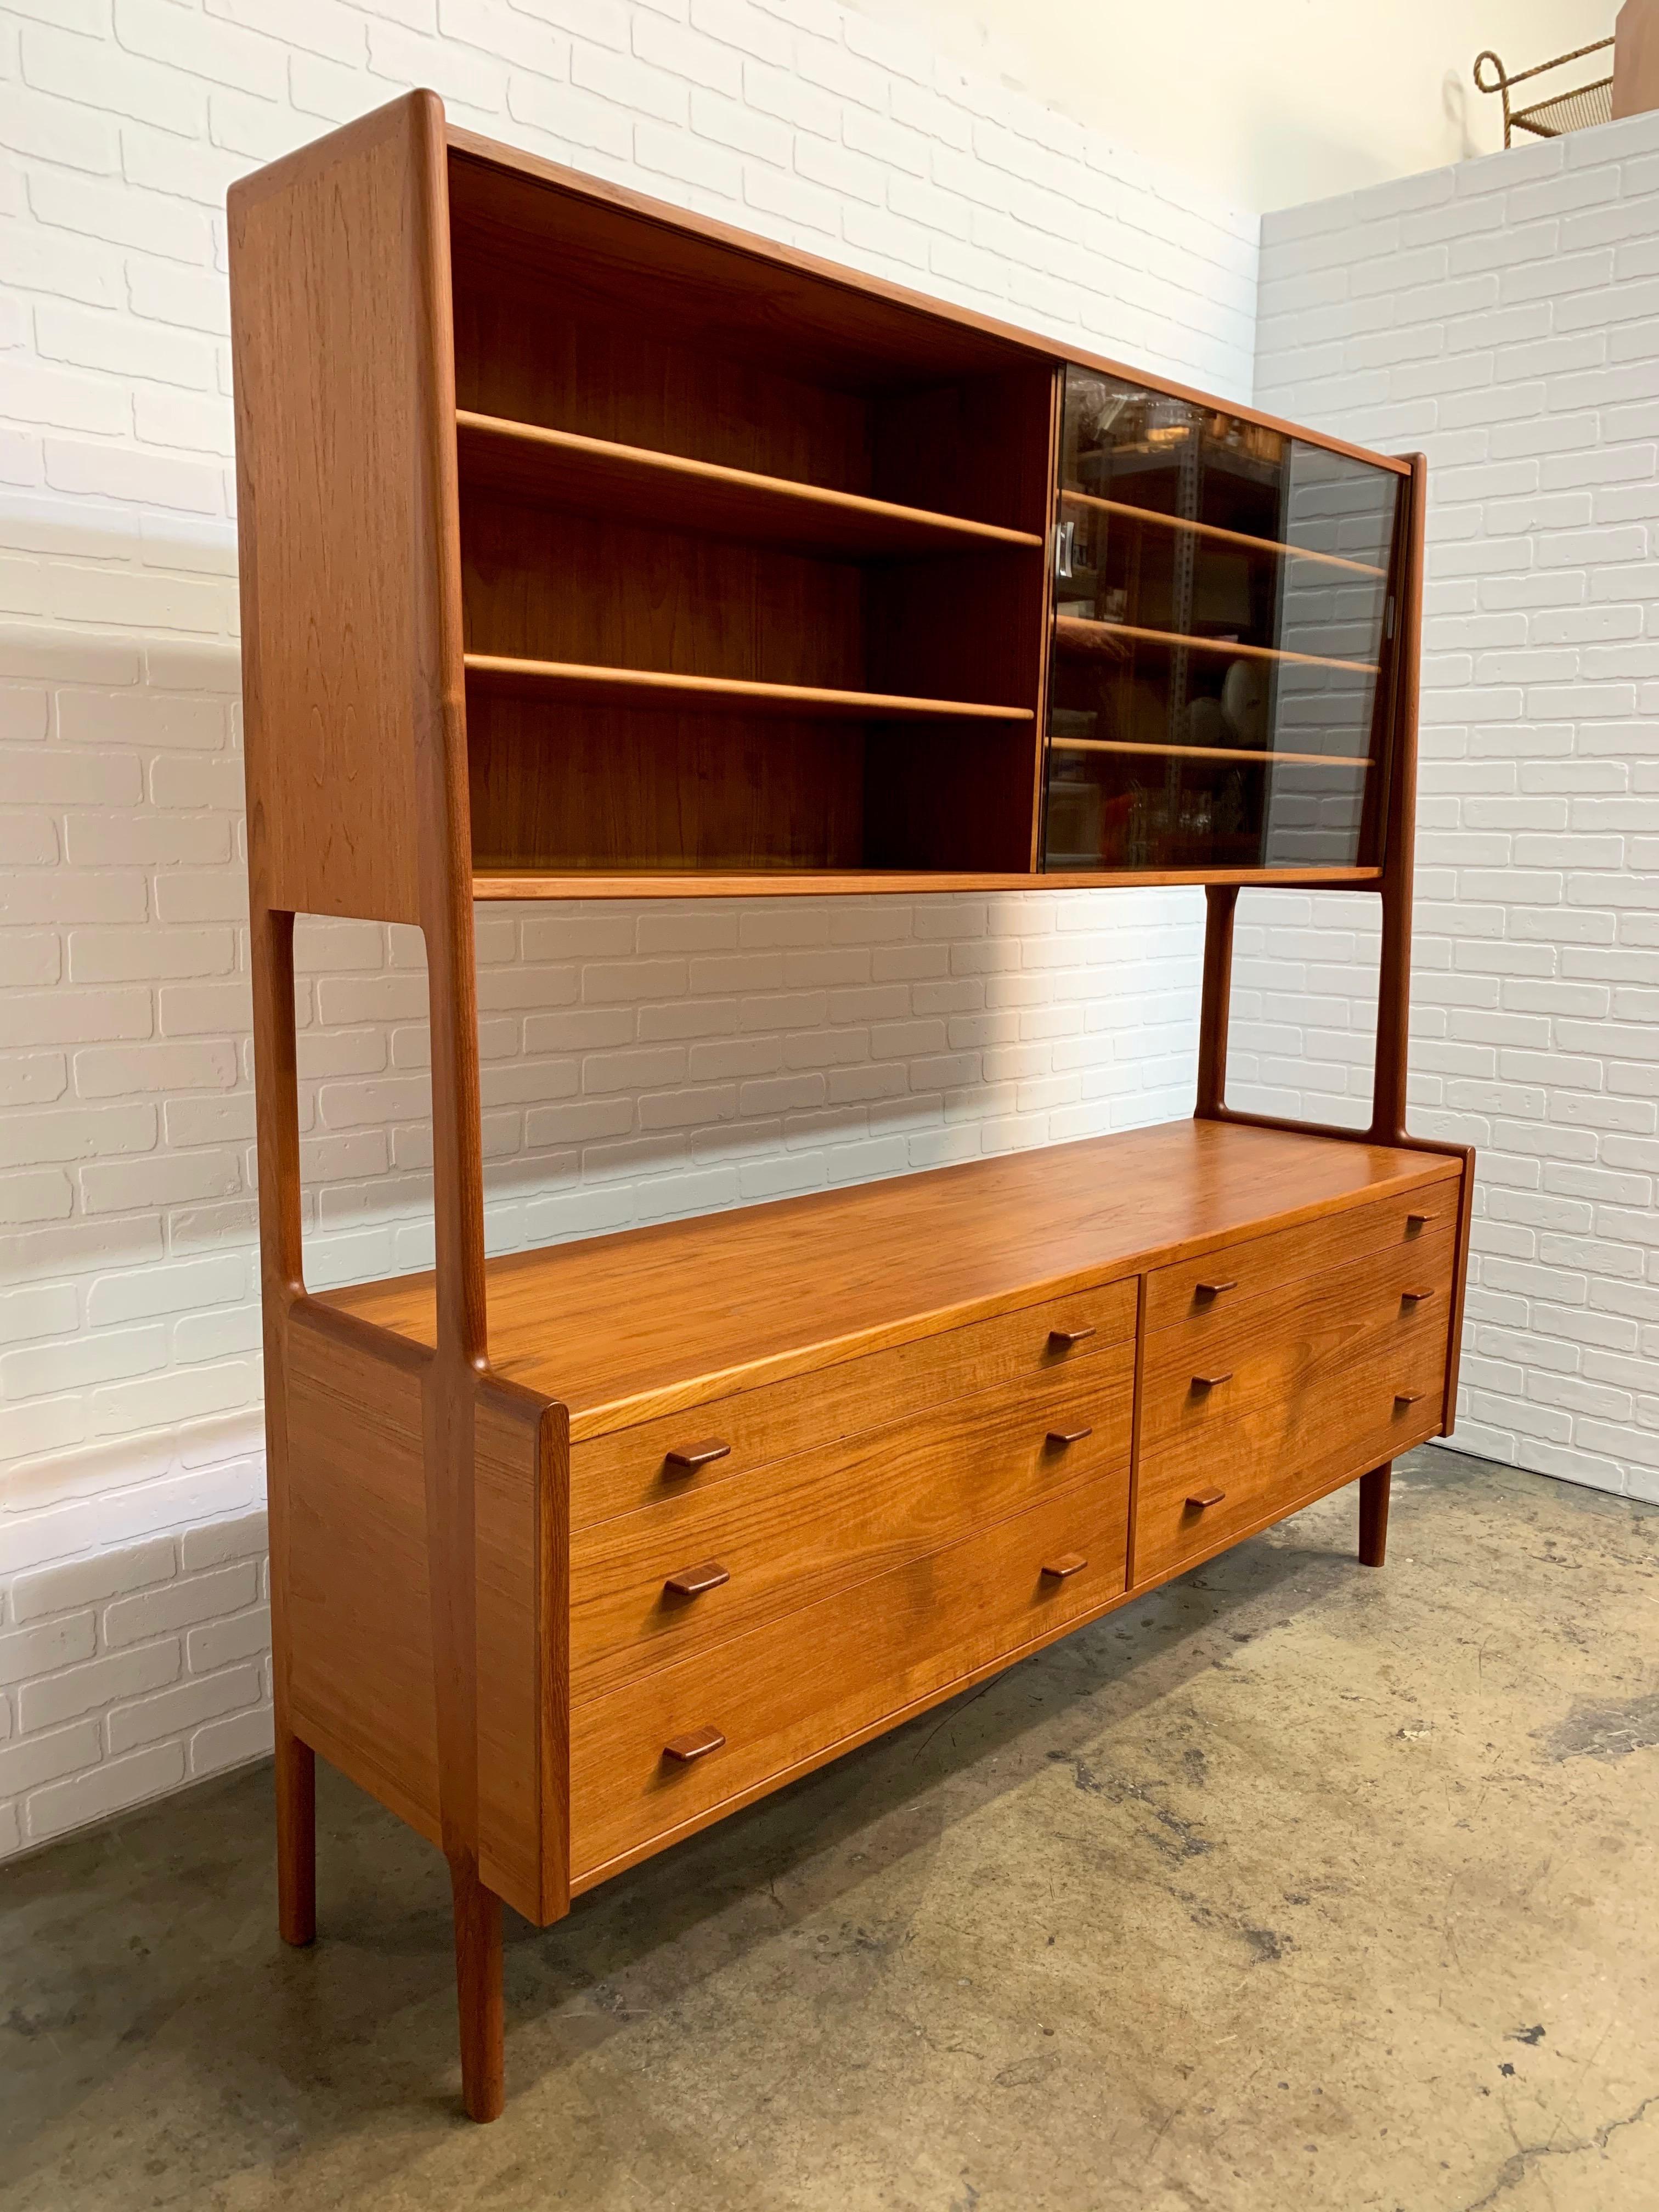 Vintage Danish modern two-tier room divider by Hans Wegner features original teak finish with carved wooden handles. Midcentury sideboard combines glass door display with graduated drawers for concealed storage. Finished on the back.